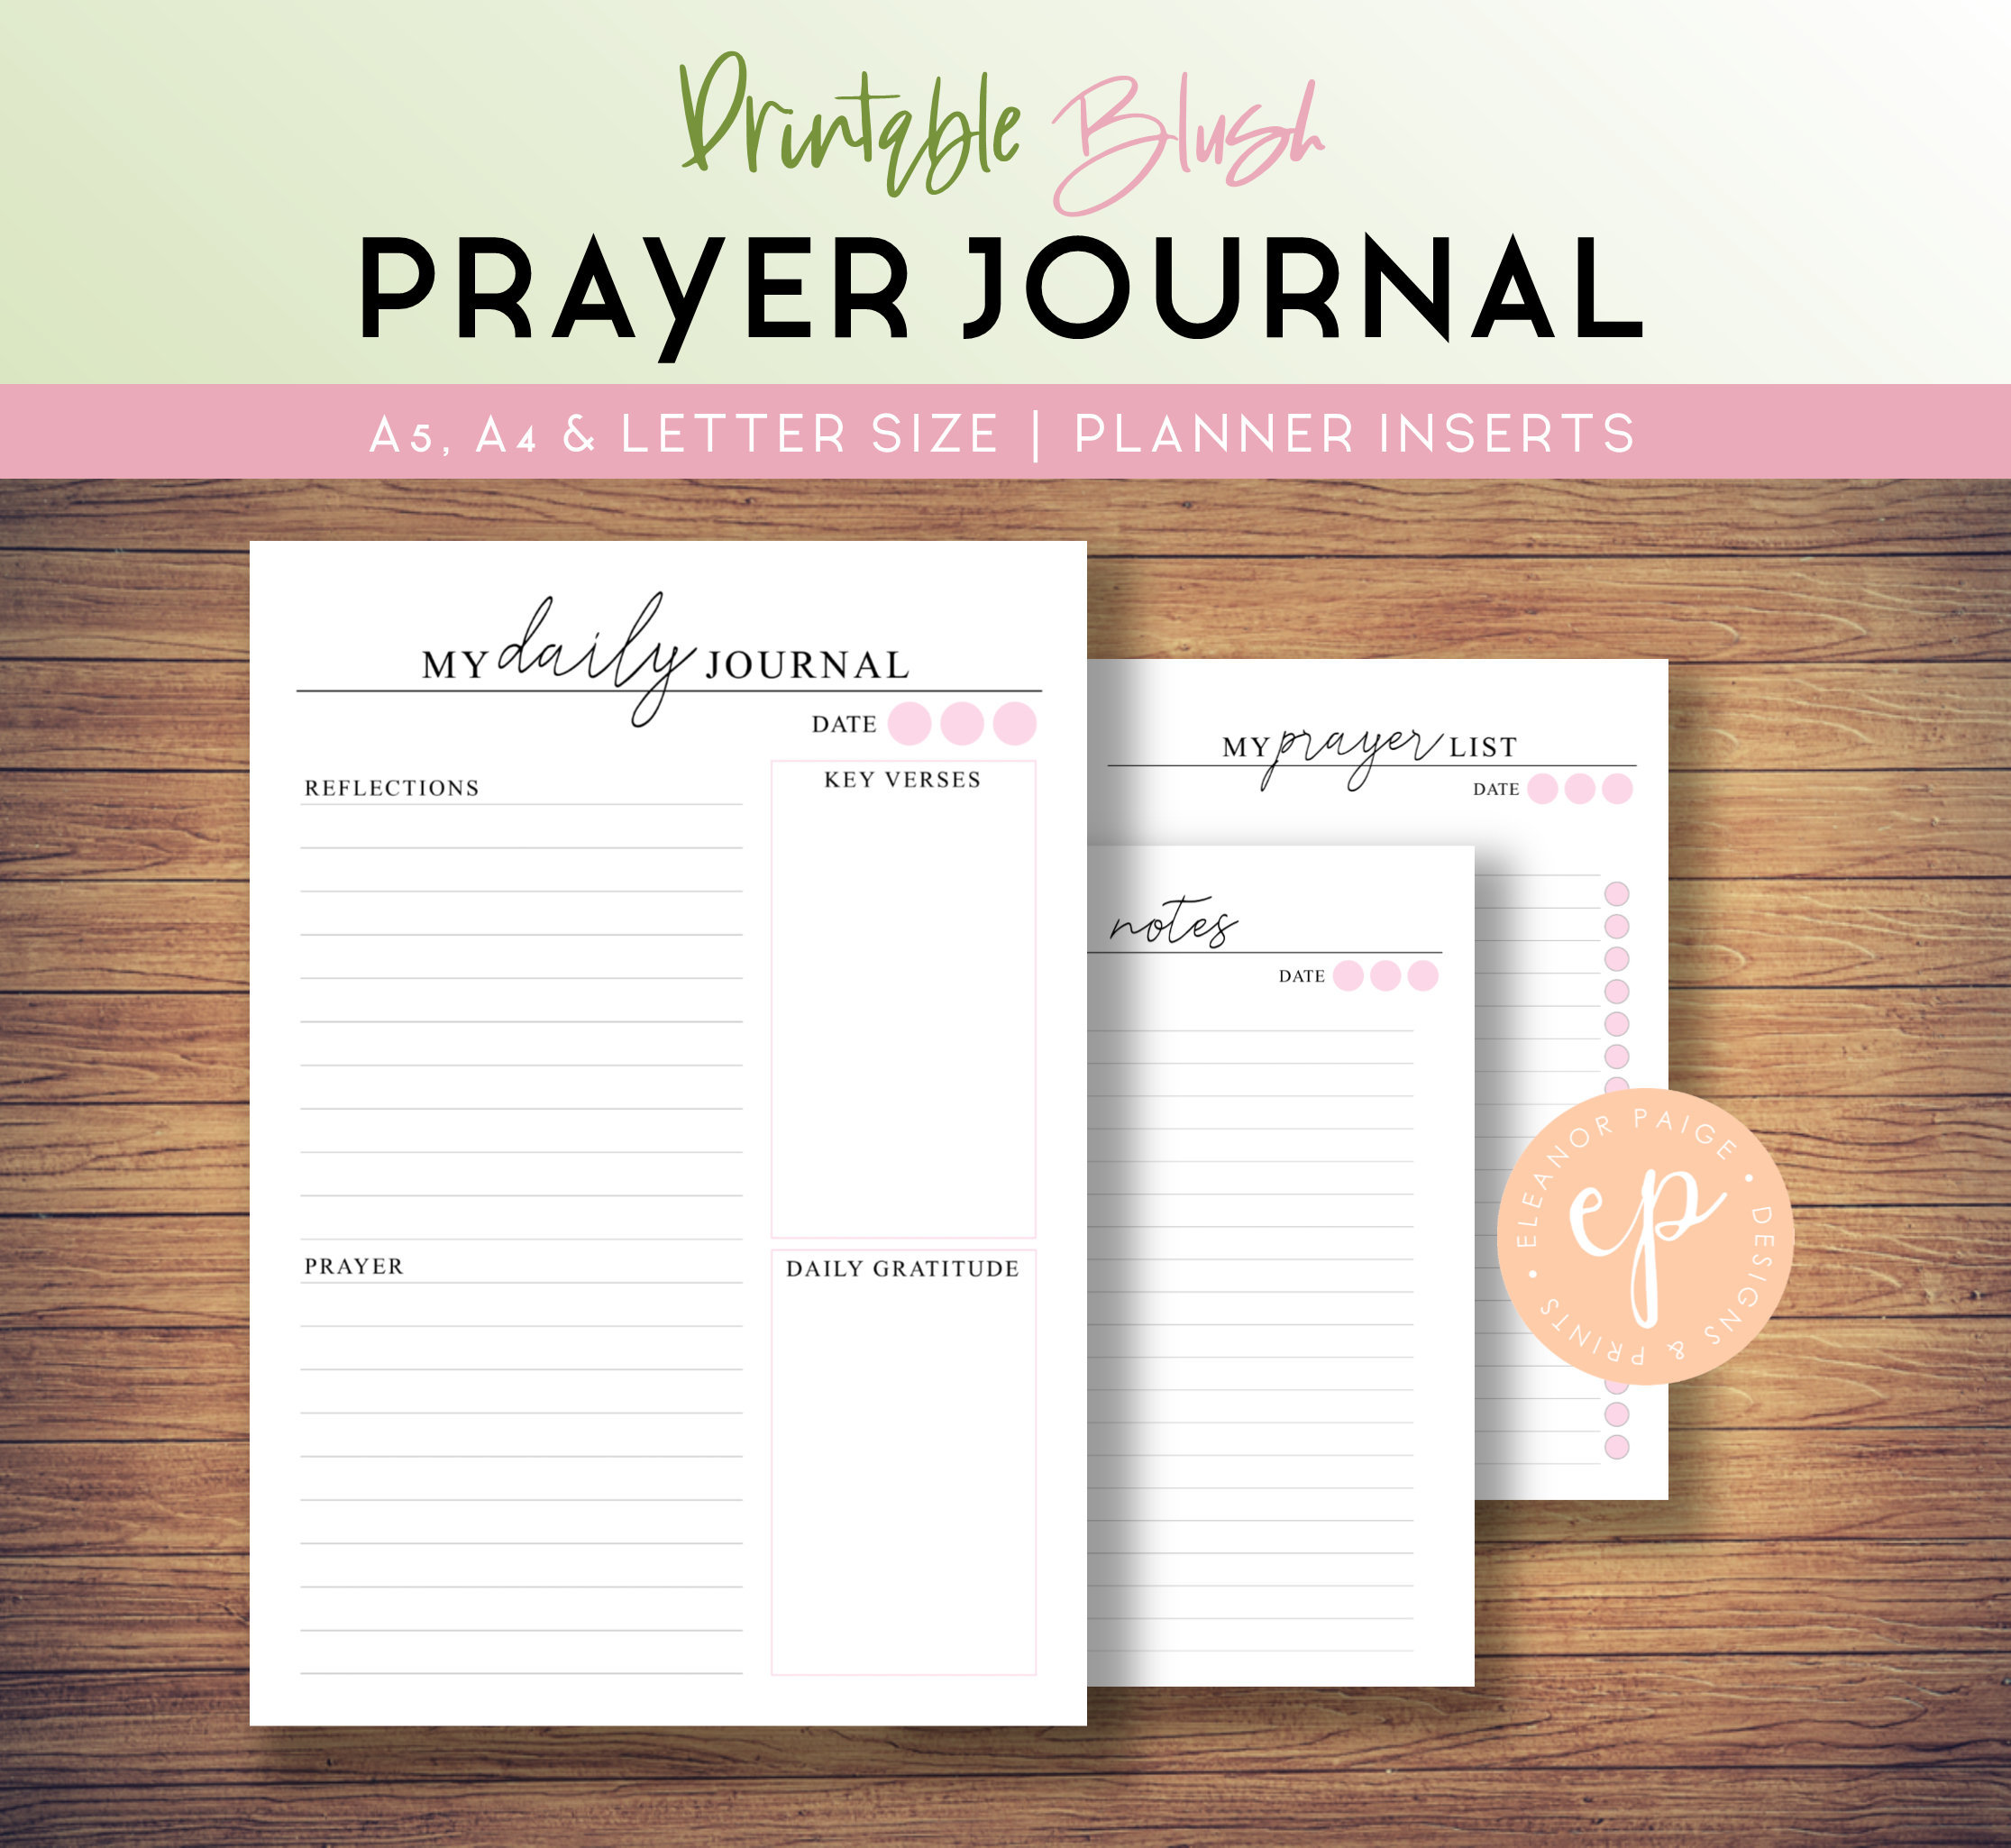 Prayer Journaling Planner Inserts A5 A4 & Letter Size | Etsy